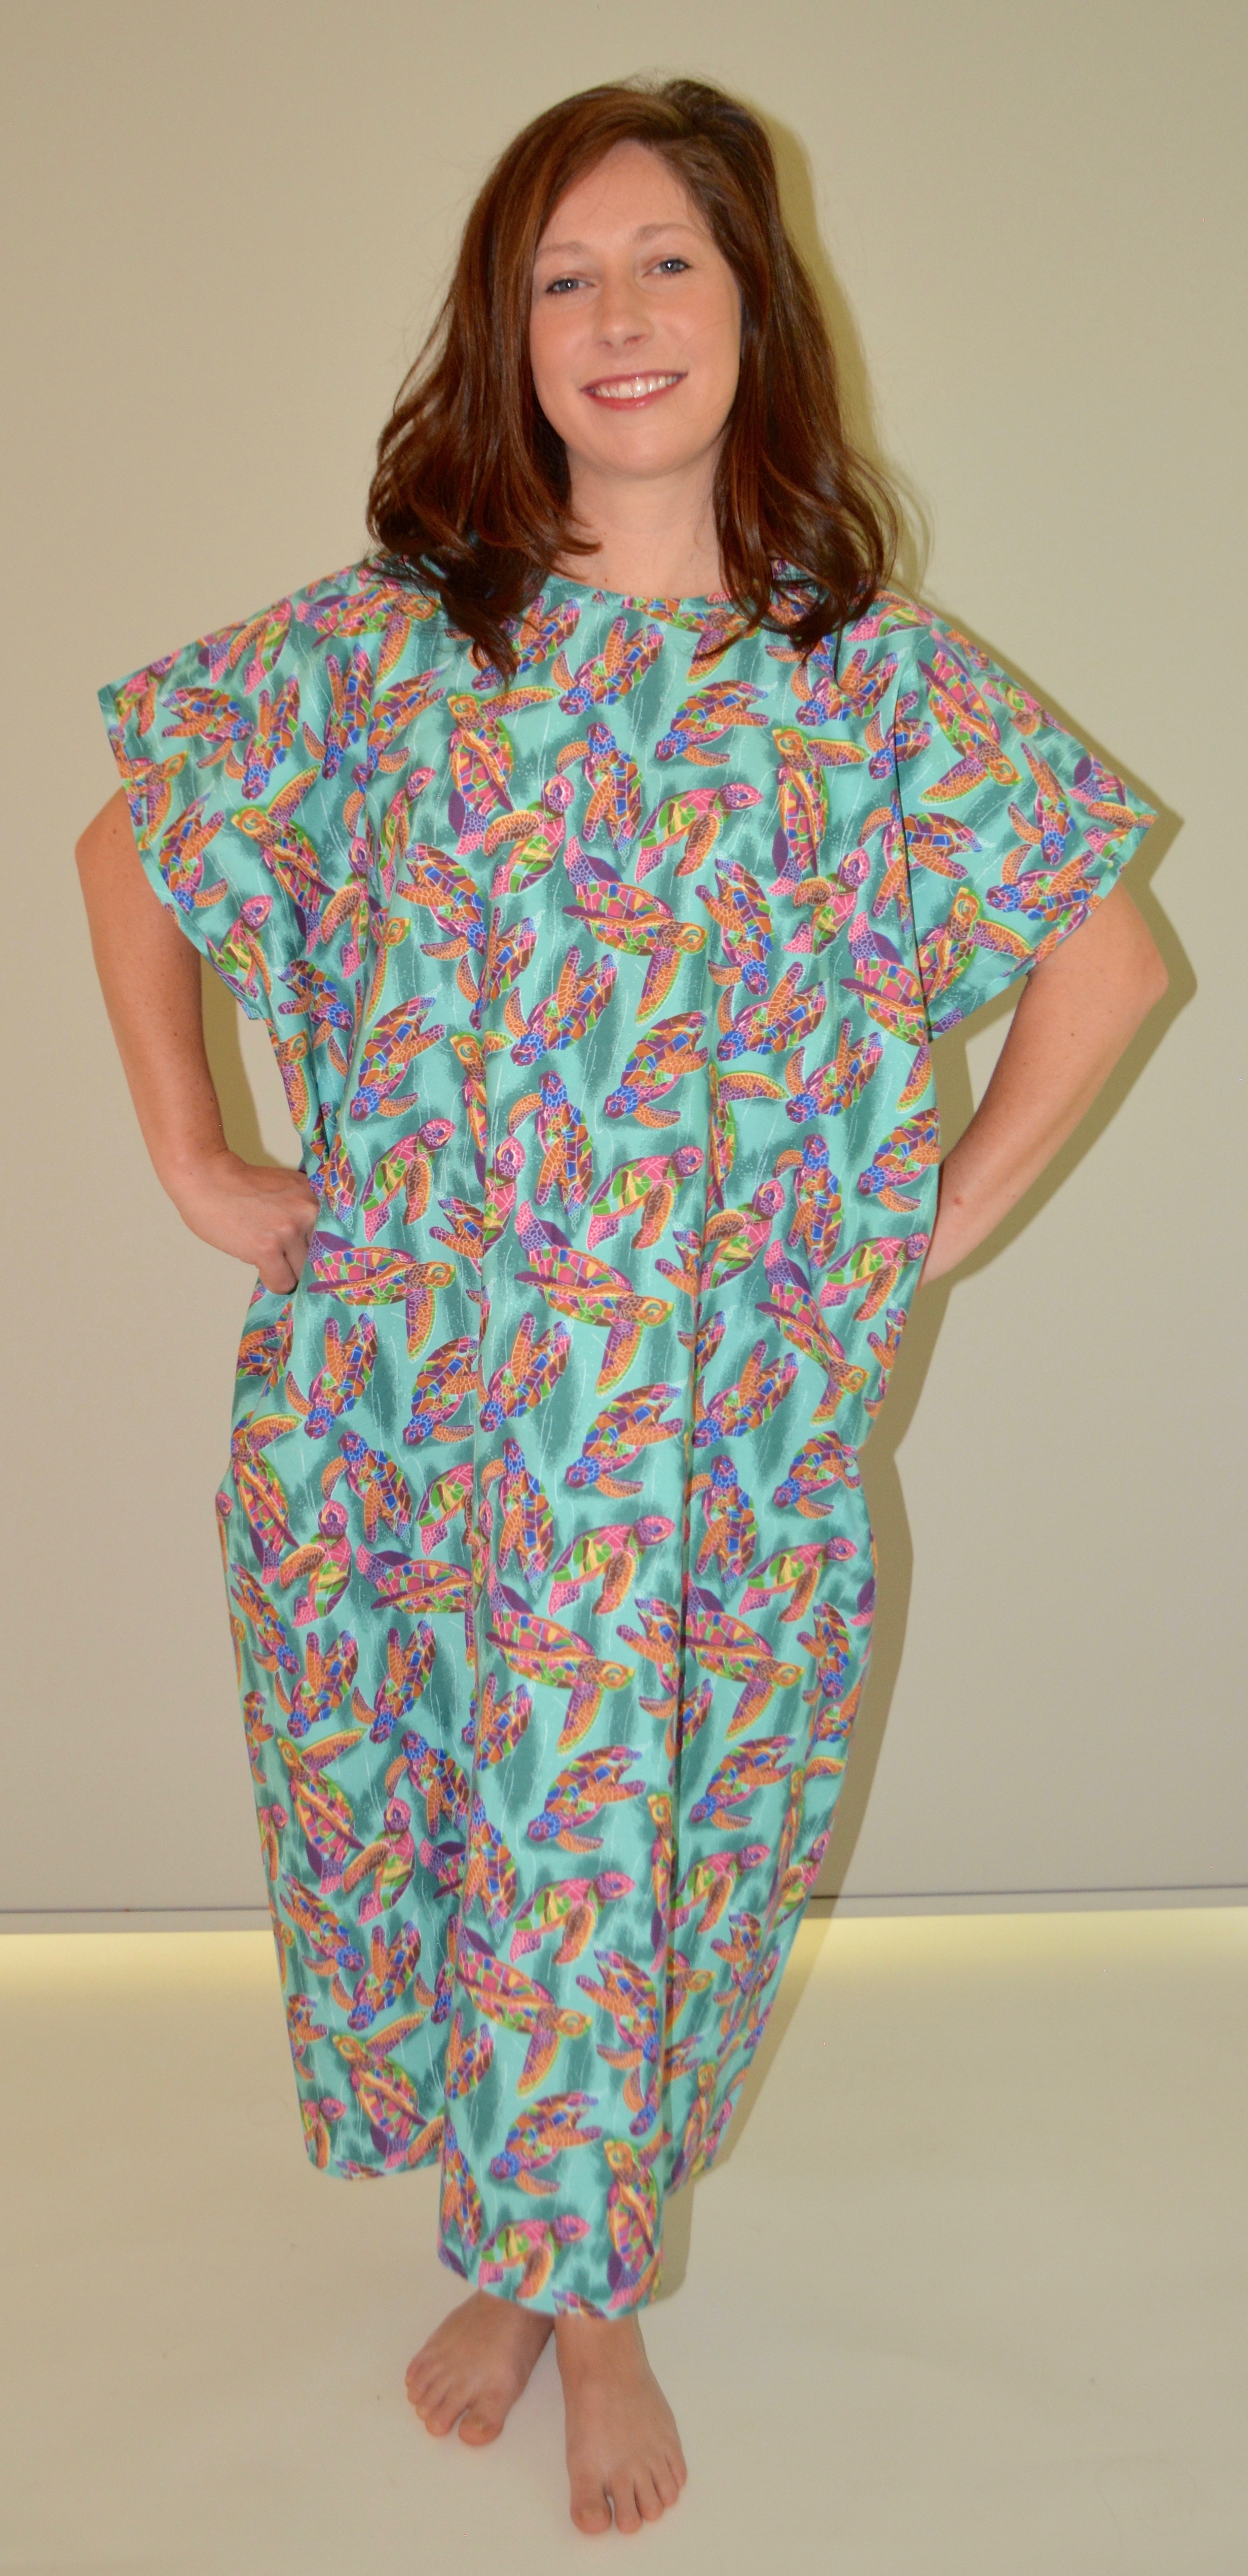 Hospital  Exam Gowns  Amplestuff  PlusSize Products and Bariatric  Resources